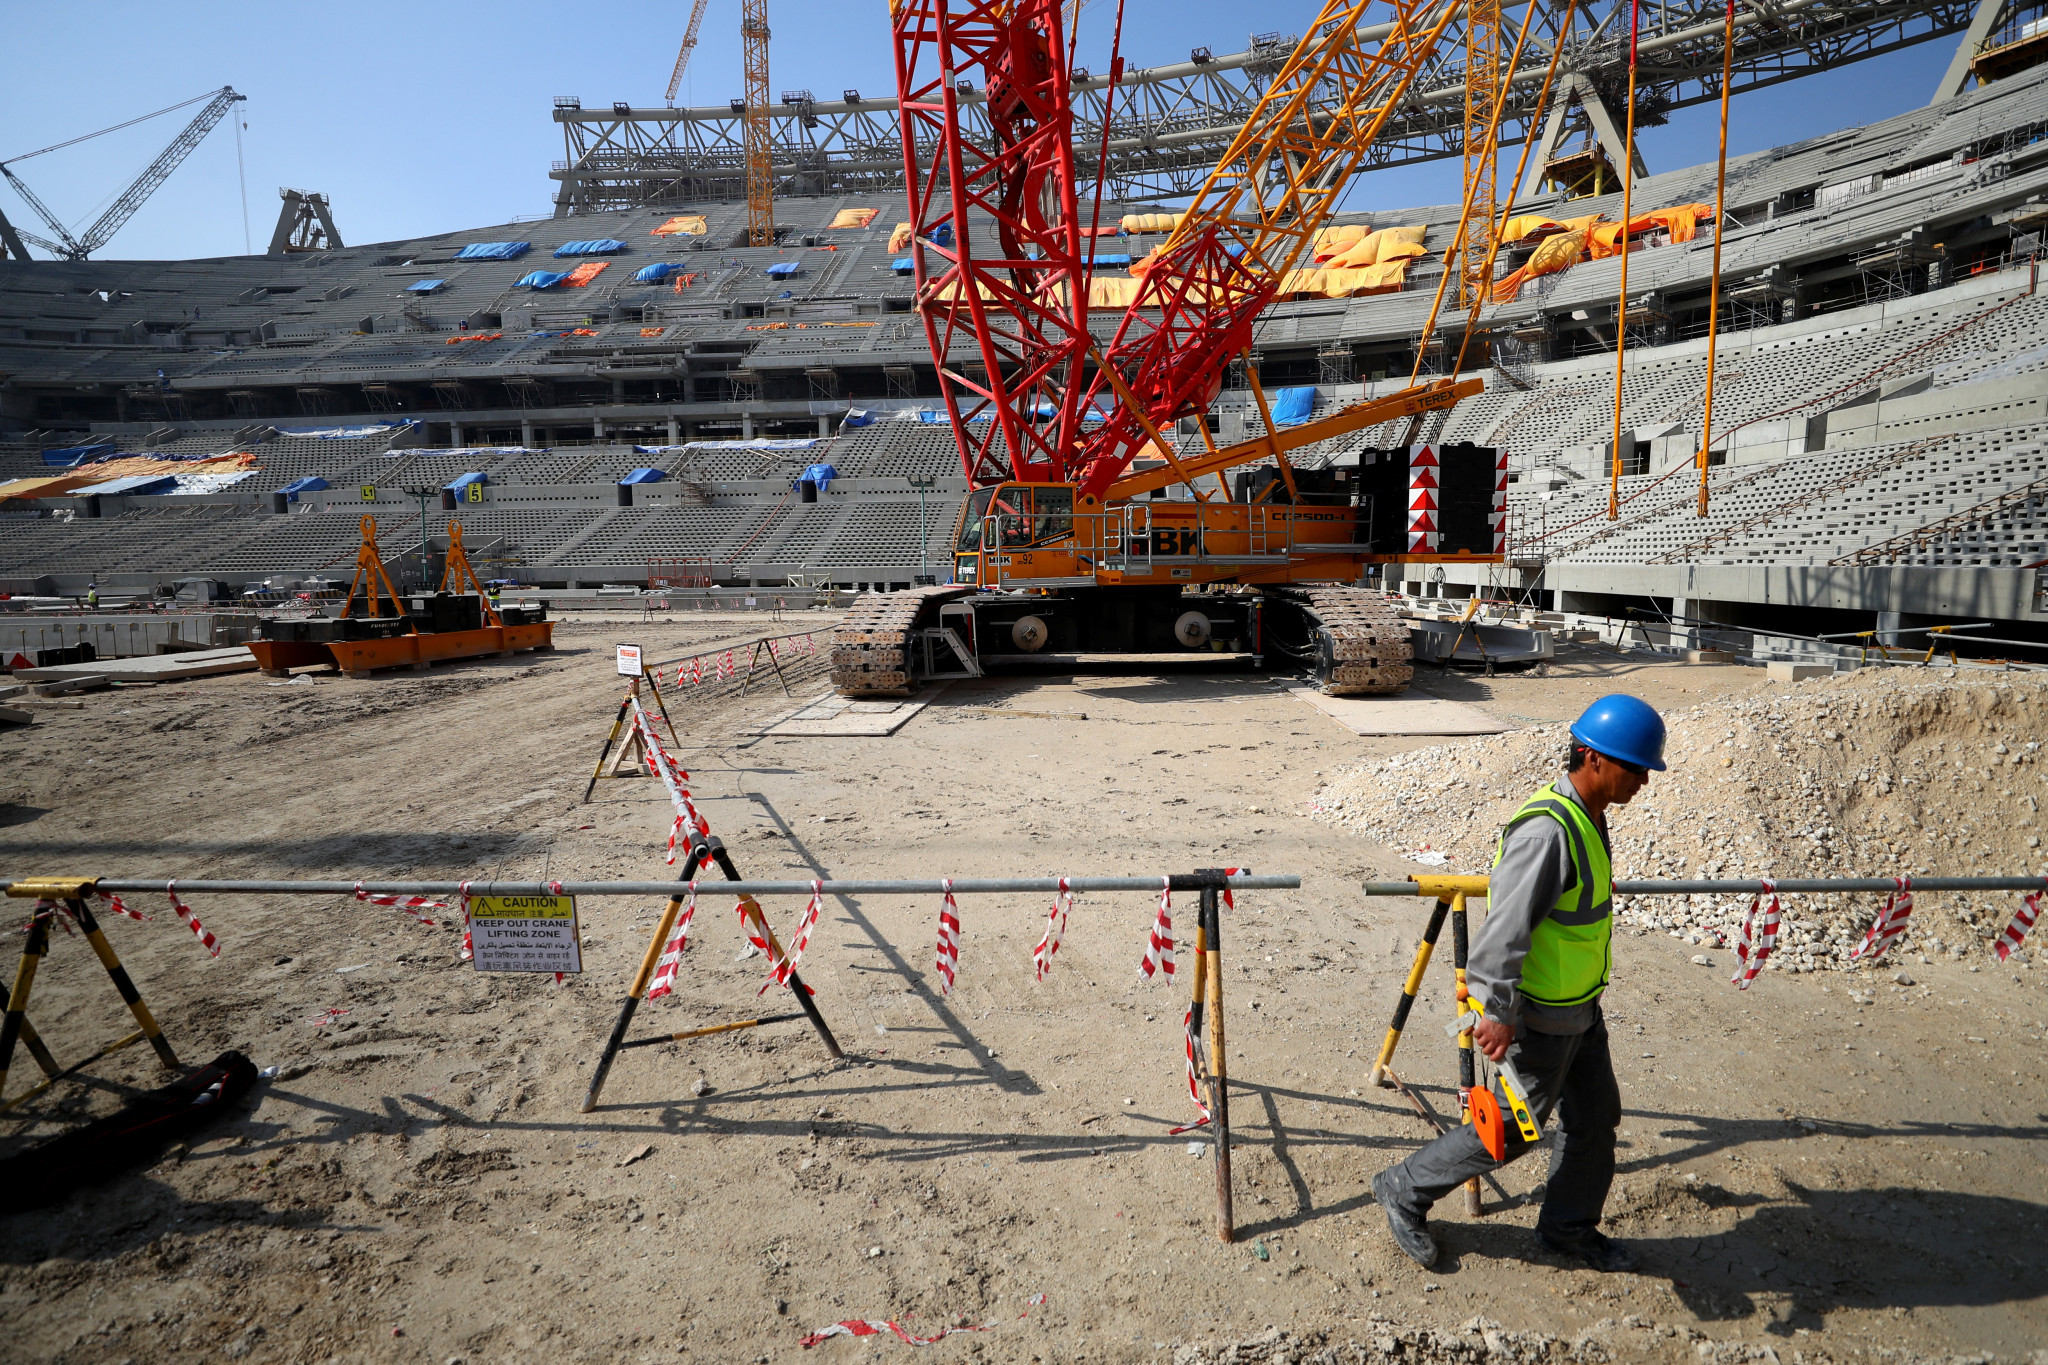 Concerns have been raised over Qatar's use of migrant labour in preparing for the 2022 FIFA World Cup ©Getty Images